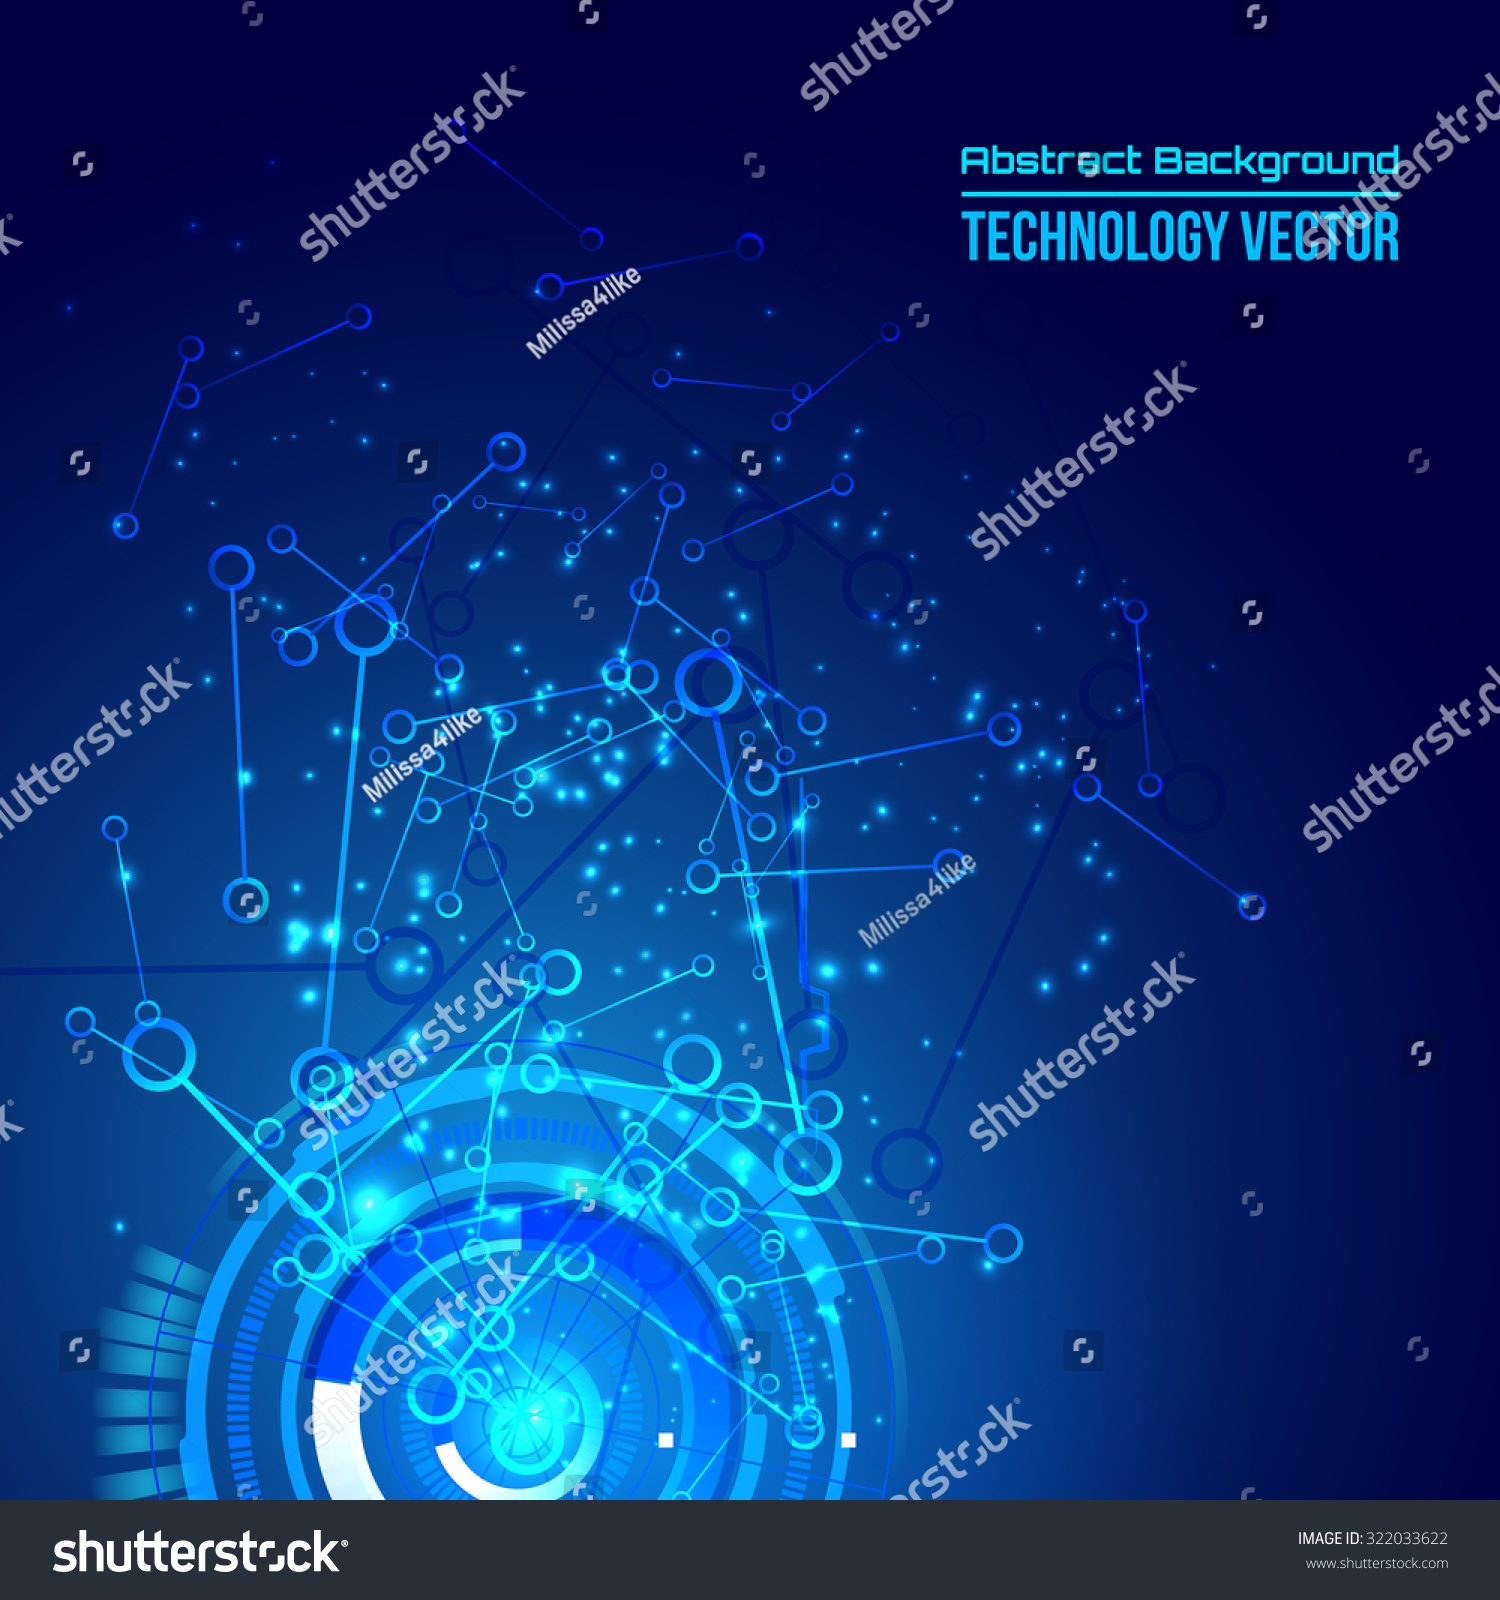 Edit Vectors Free Online - abstract background | Shutterstock Editor